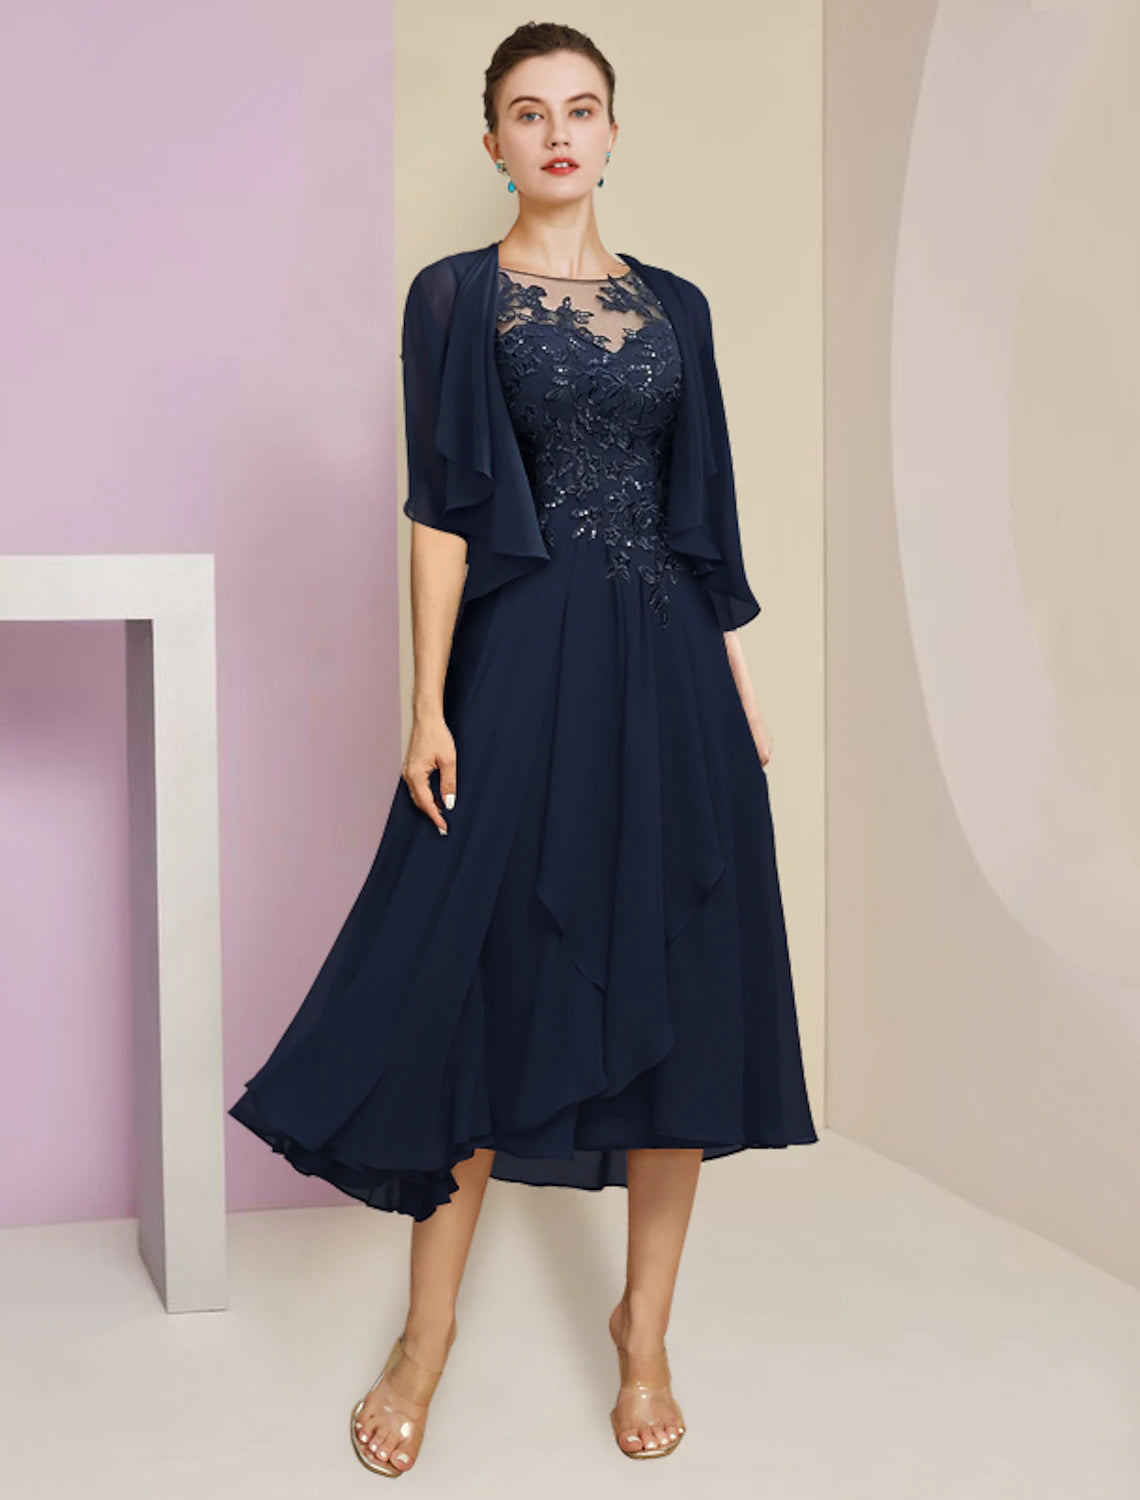 Two Piece A-Line Mother of the Bride Dress Formal Wedding Guest Elegant Scoop Neck Tea Length Chiffon Lace Short Sleeve Fall Wrap Included with Pleats Sequin Appliques